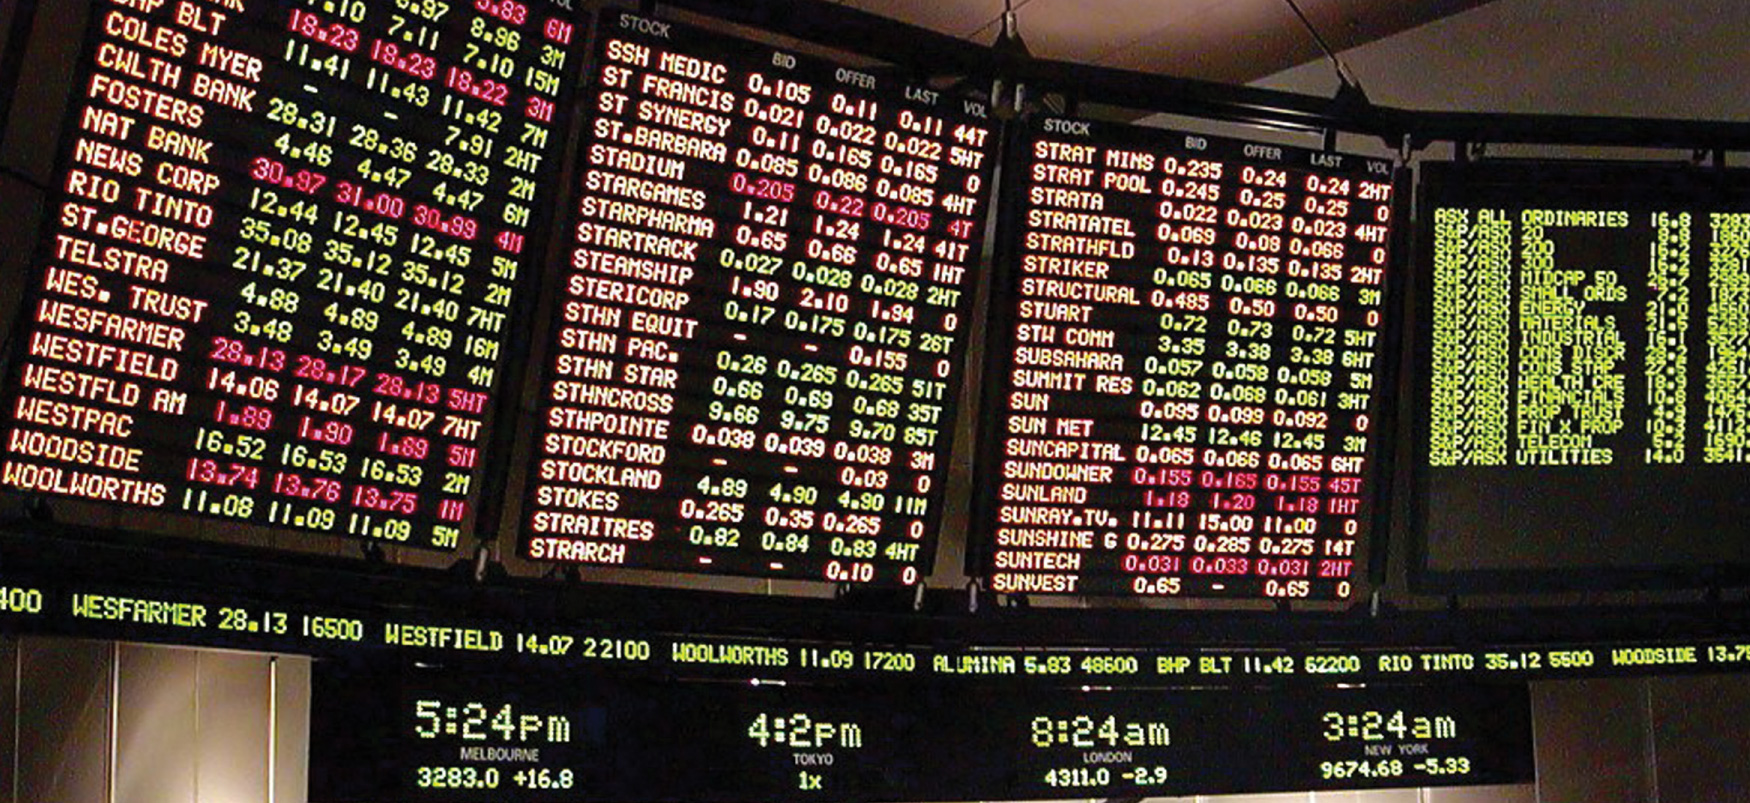 Electronic boards showing live ticker updates of the shares of companies listed on a stock market.